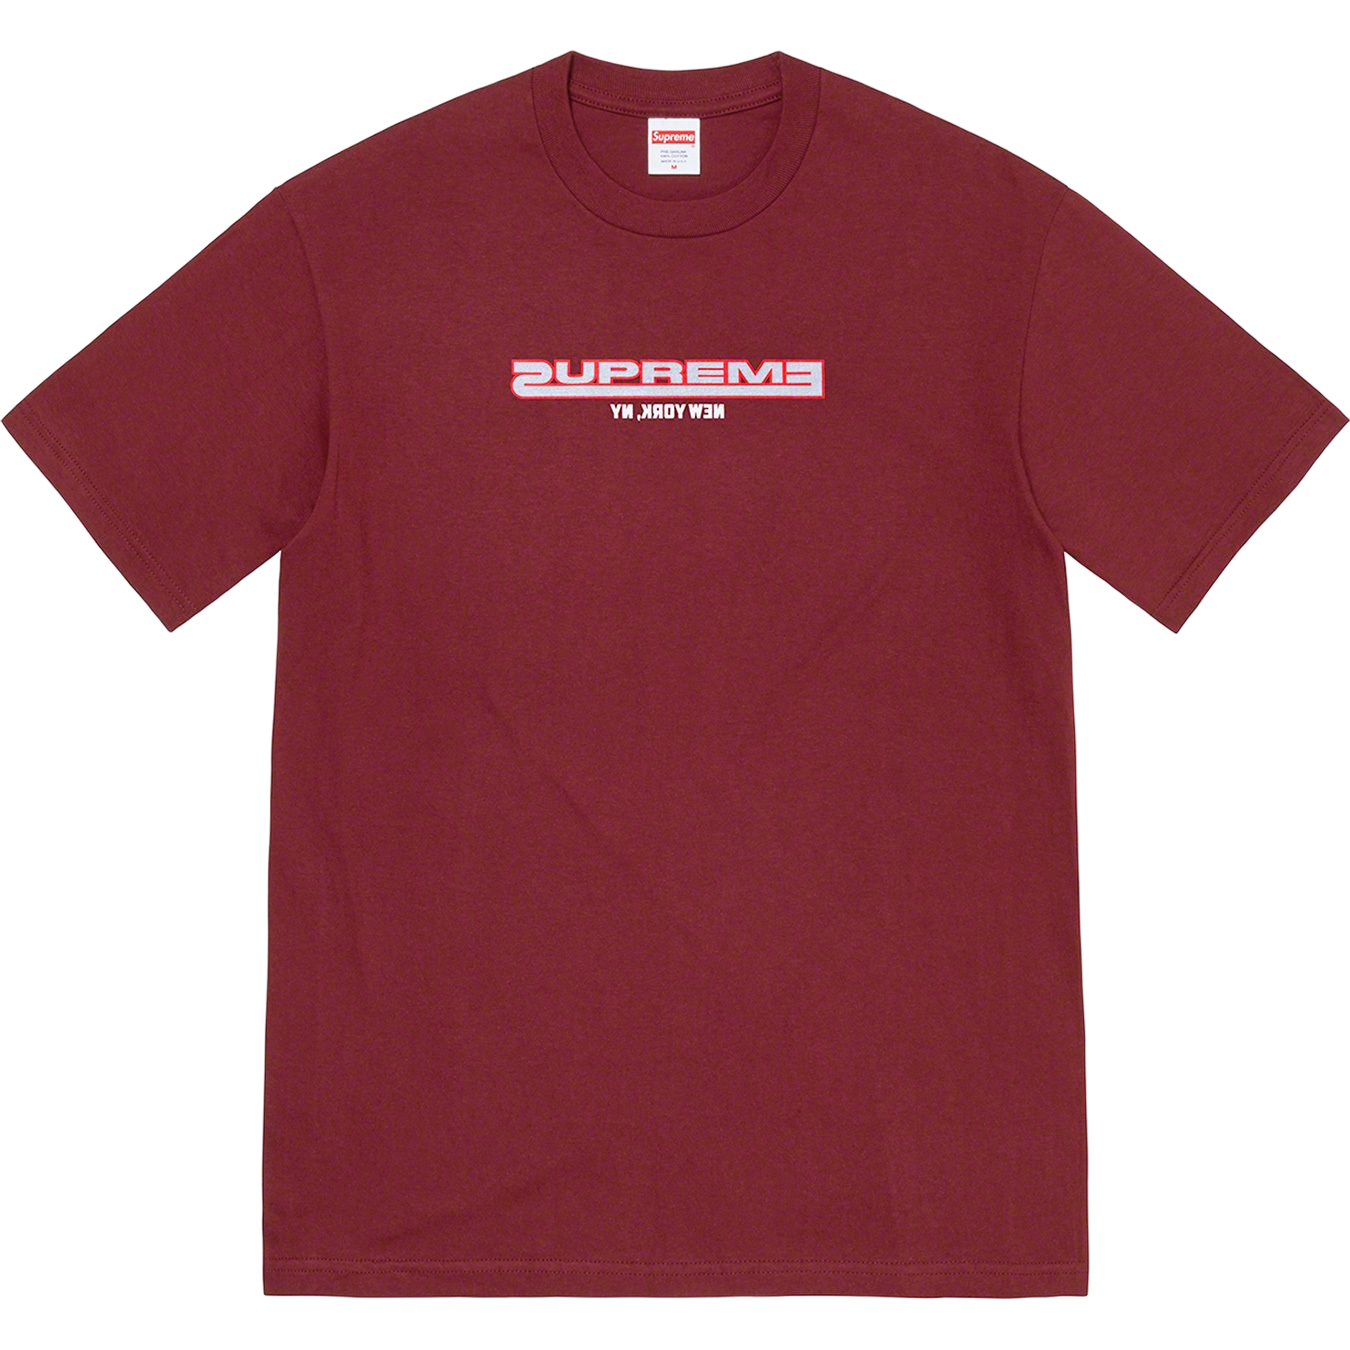 Supreme Connected Tee - Burgundy